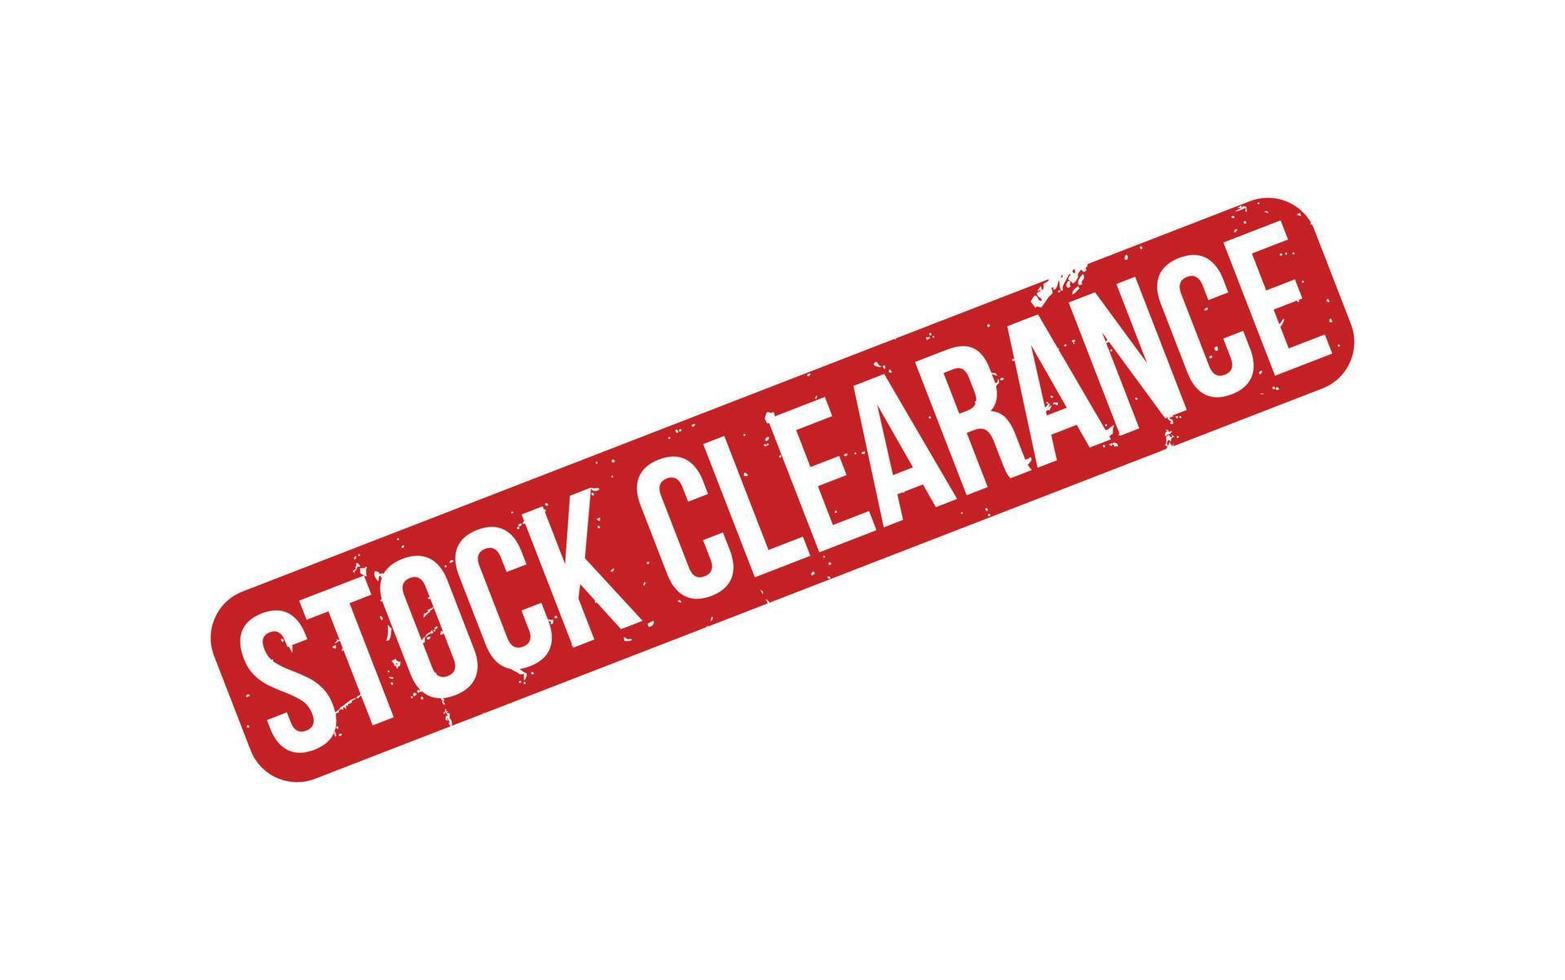 Stock Clearance Rubber Stamp Seal Vector